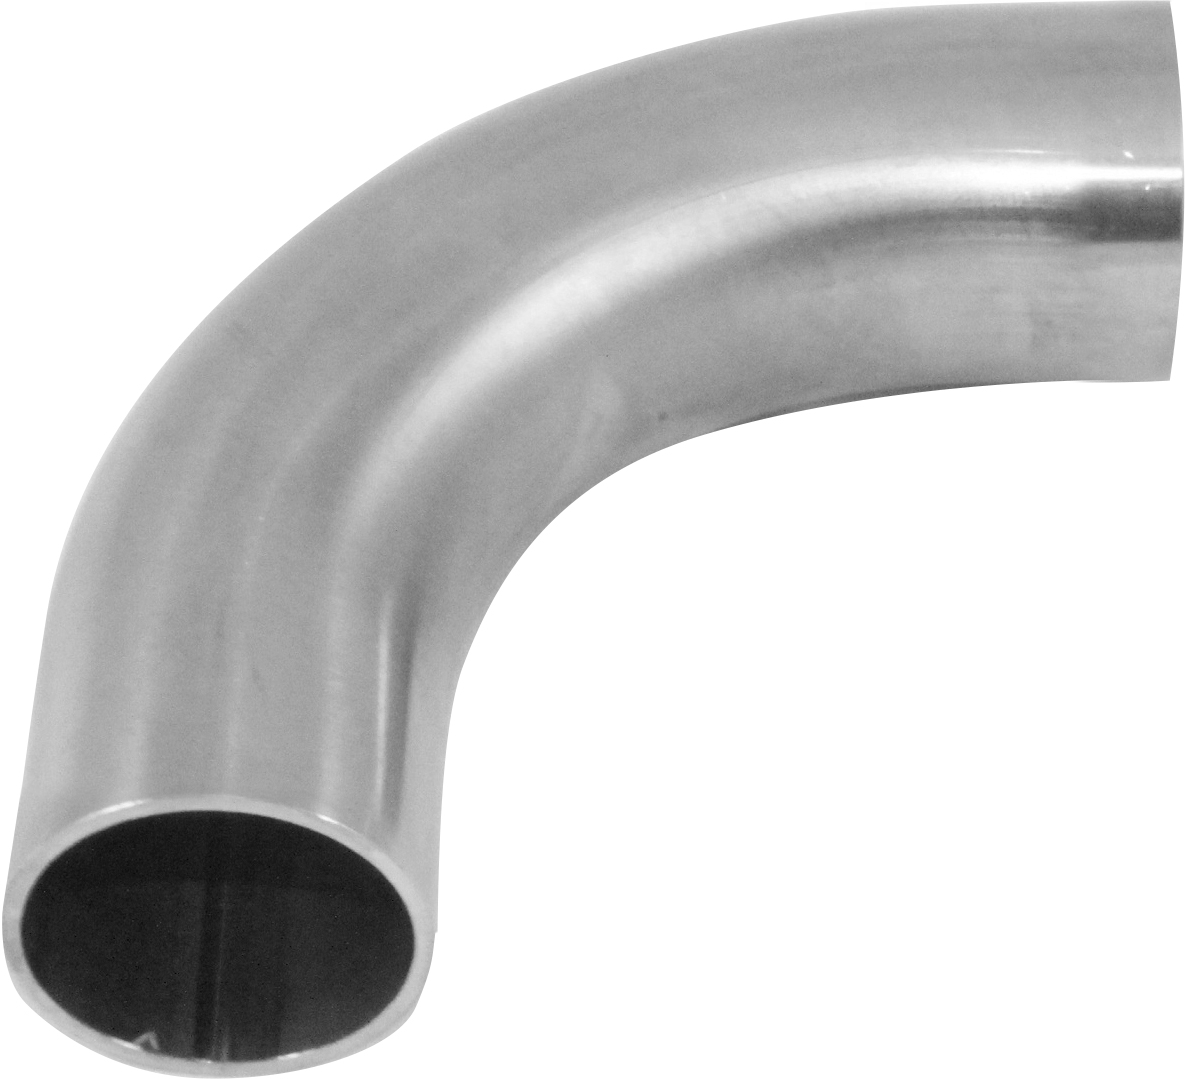 Stainless 90 Degree Tube Bends